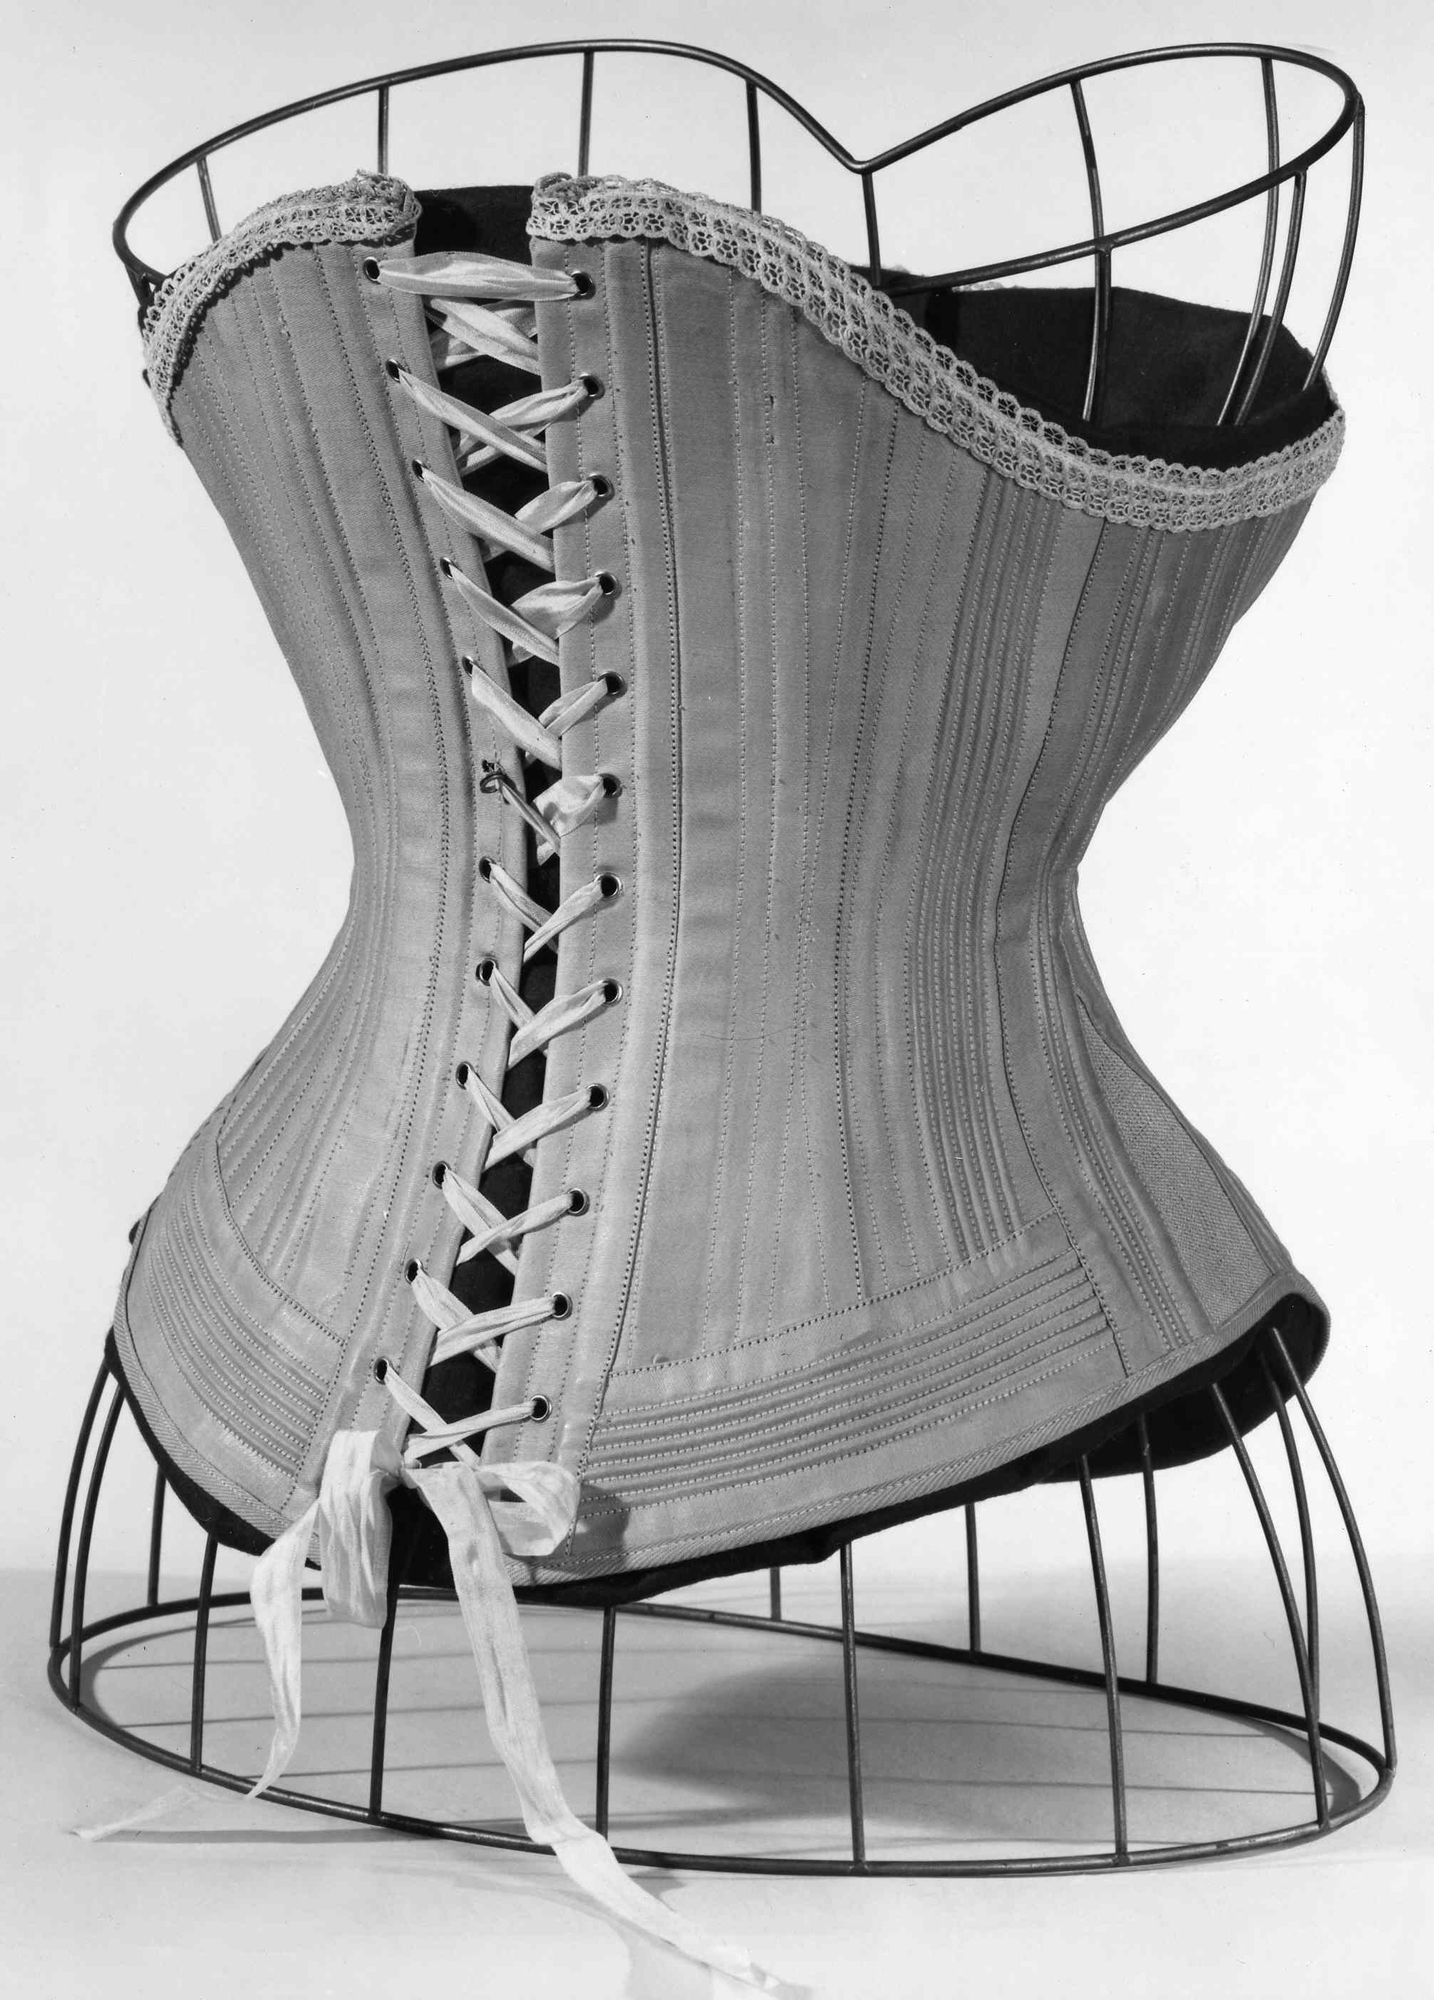 Corsets 1870-1890 Image Sequence  Fashion and Decor: A Cultural